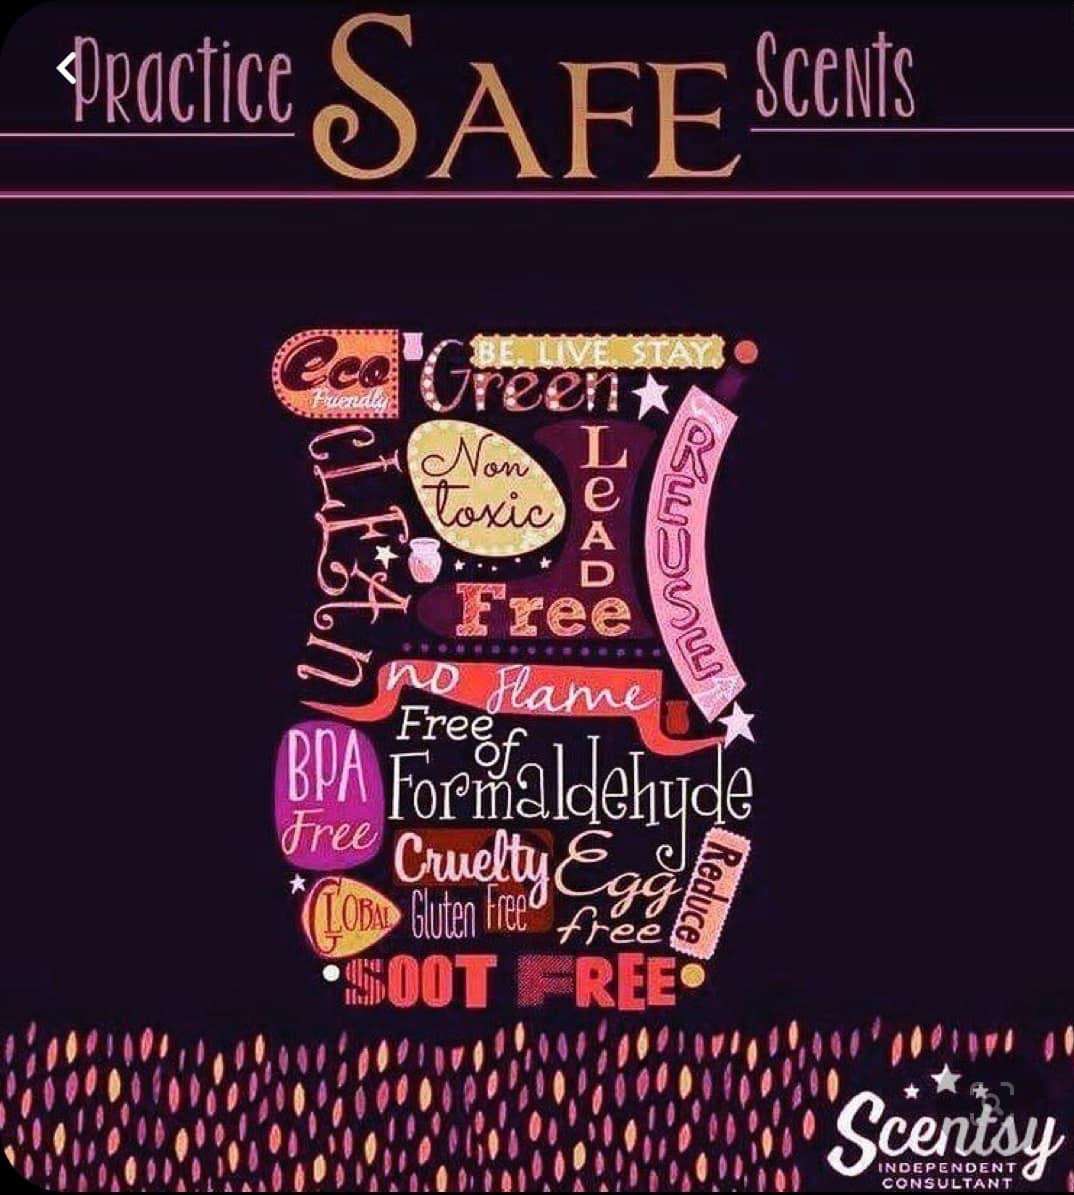 Practice safe scents puzzle online from photo